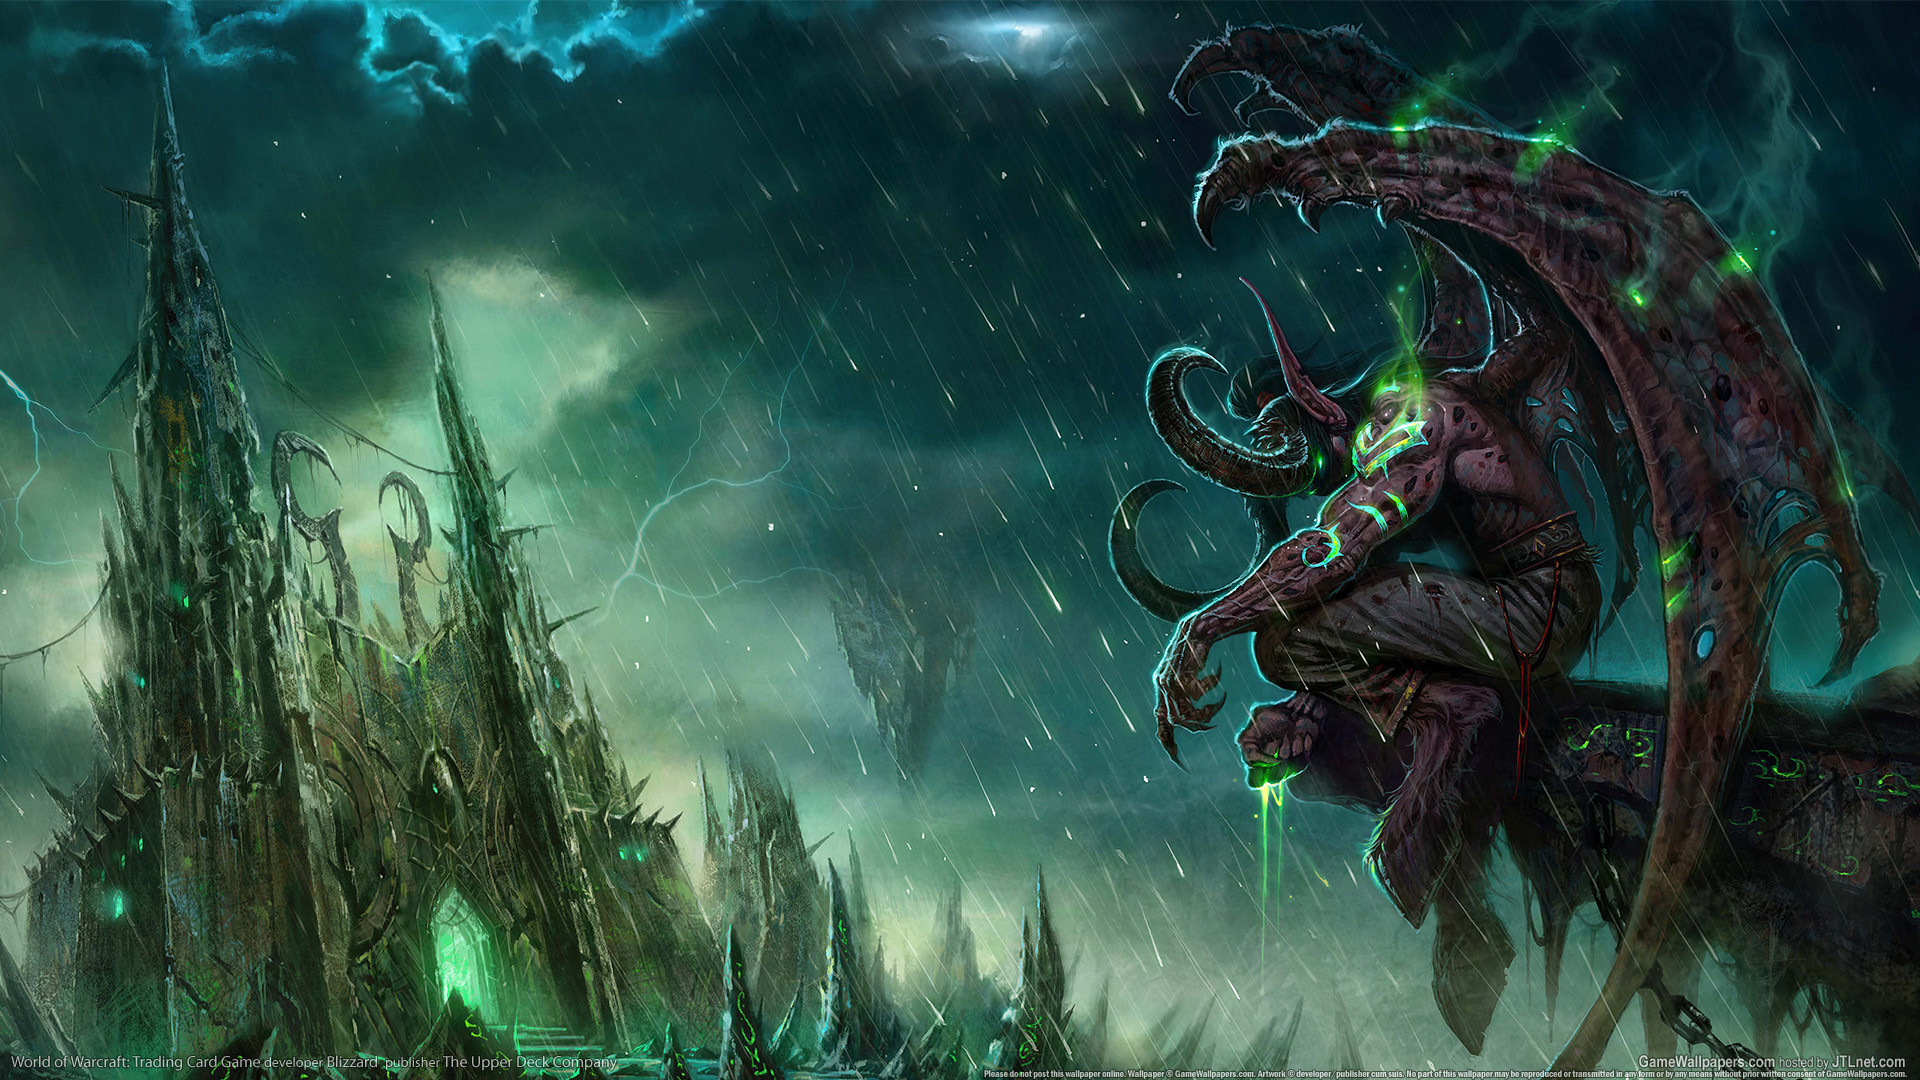 1920x1080 World Of Warcraft Wallpaper Wallpape Hd Game xpx Concept